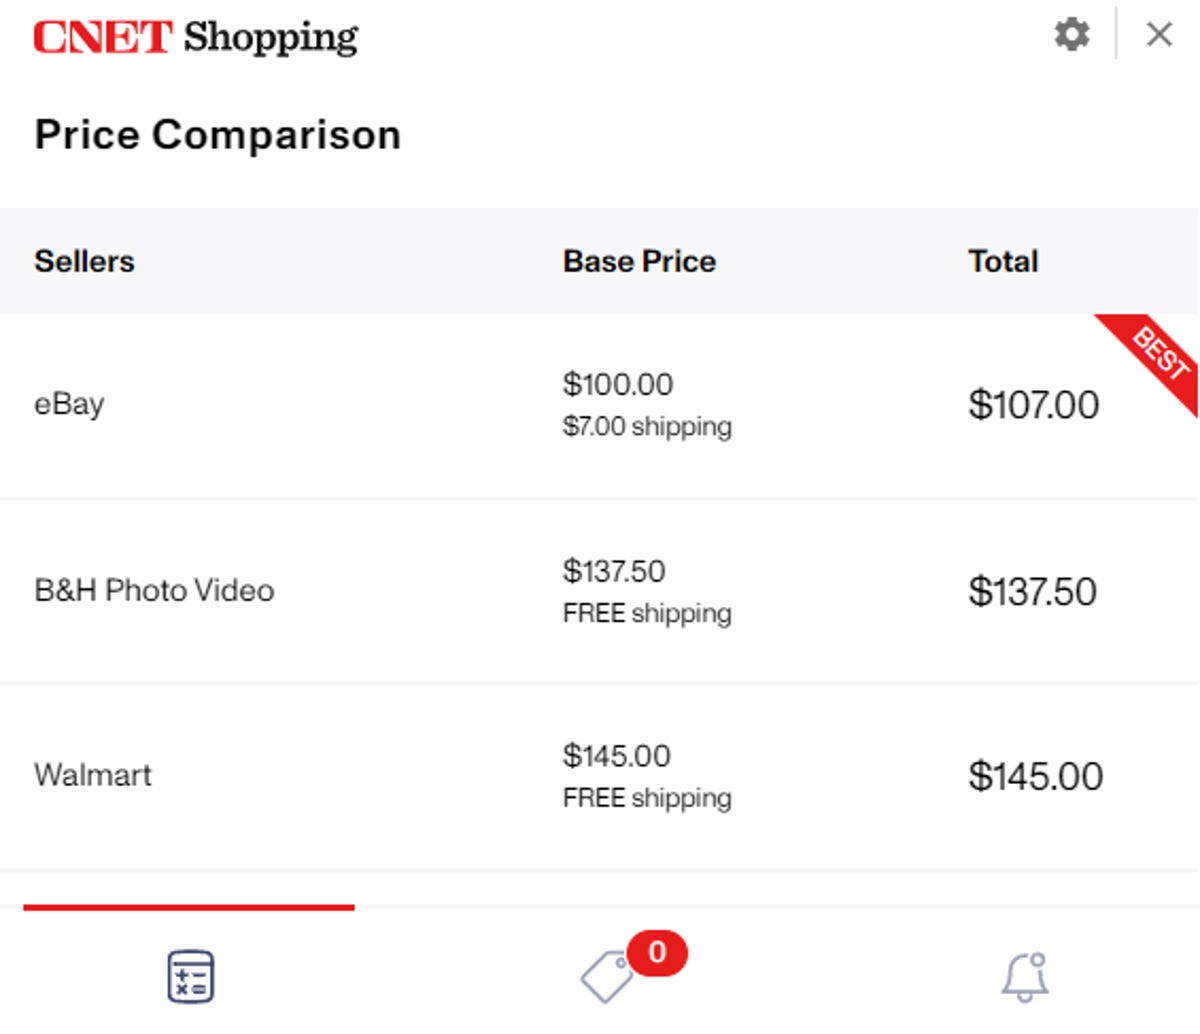 Looking for Great Deals? Use CNET Shopping to Save Time and Money - CNET